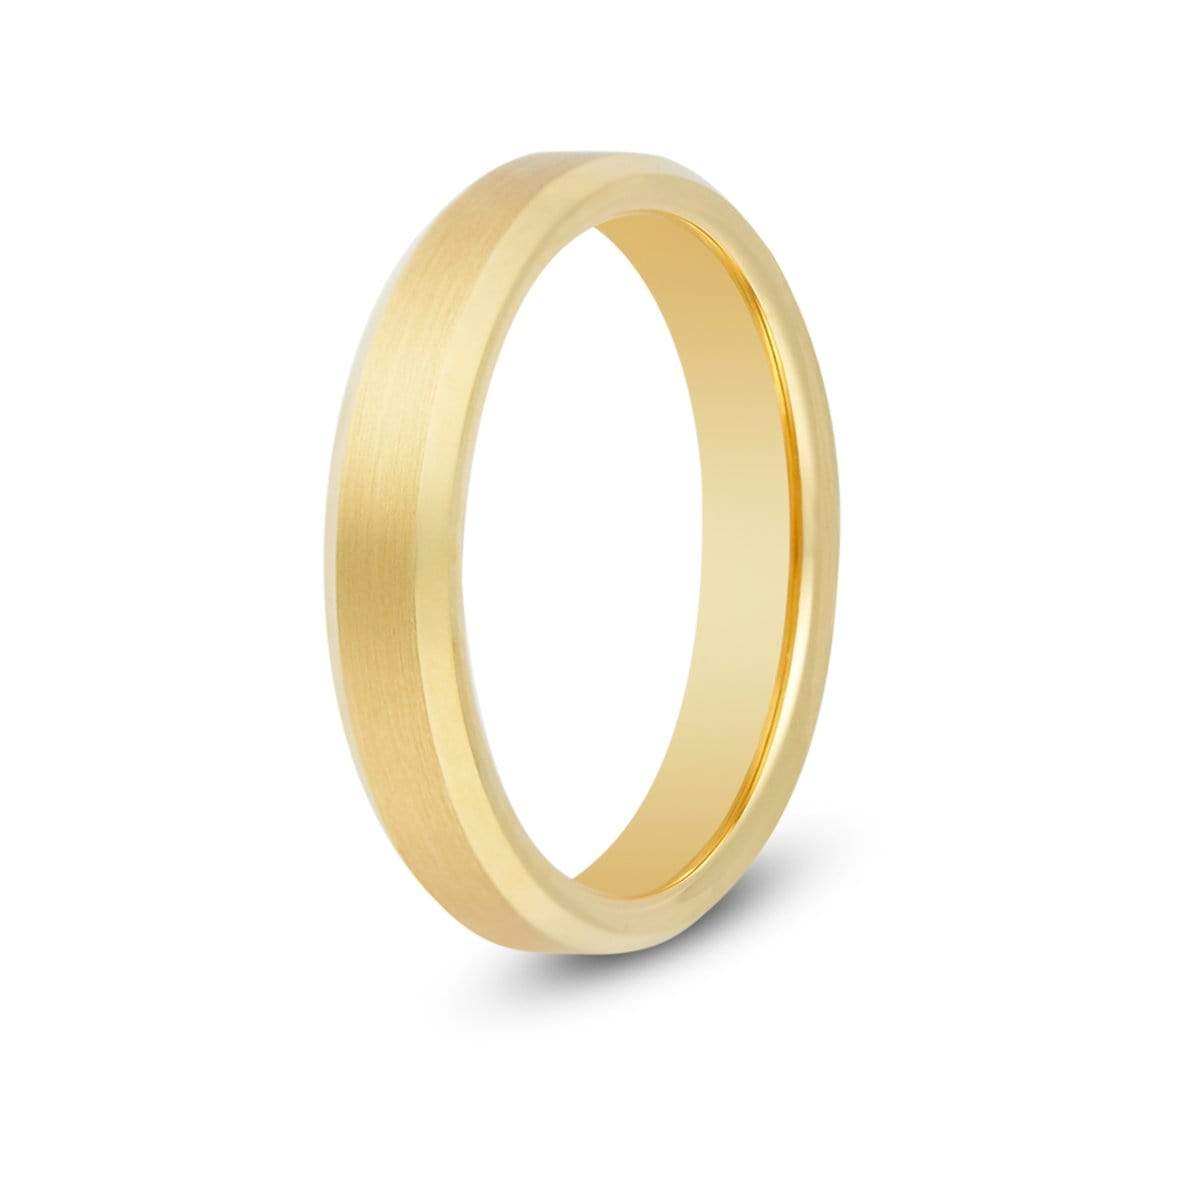 4mm Brushed Gold Beveled Tungsten Ring